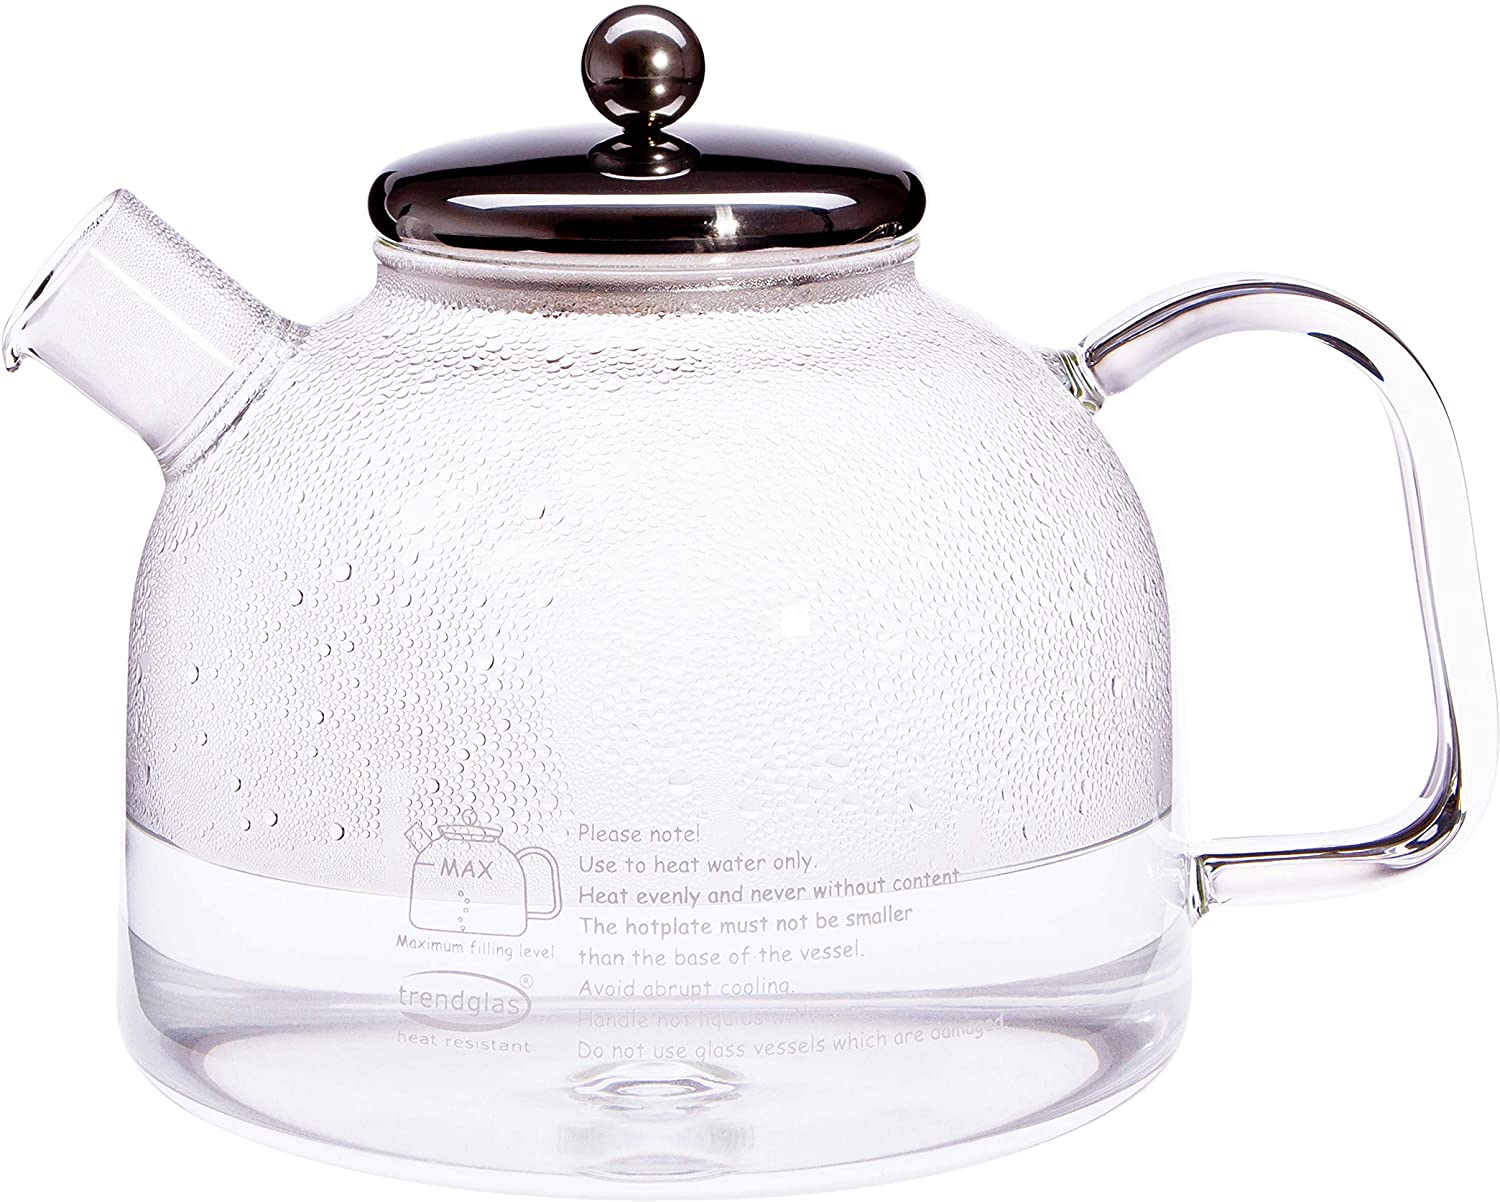 Trendglas Jena 9759 Kettle with Stainless Steel Lid 1.75 Litres